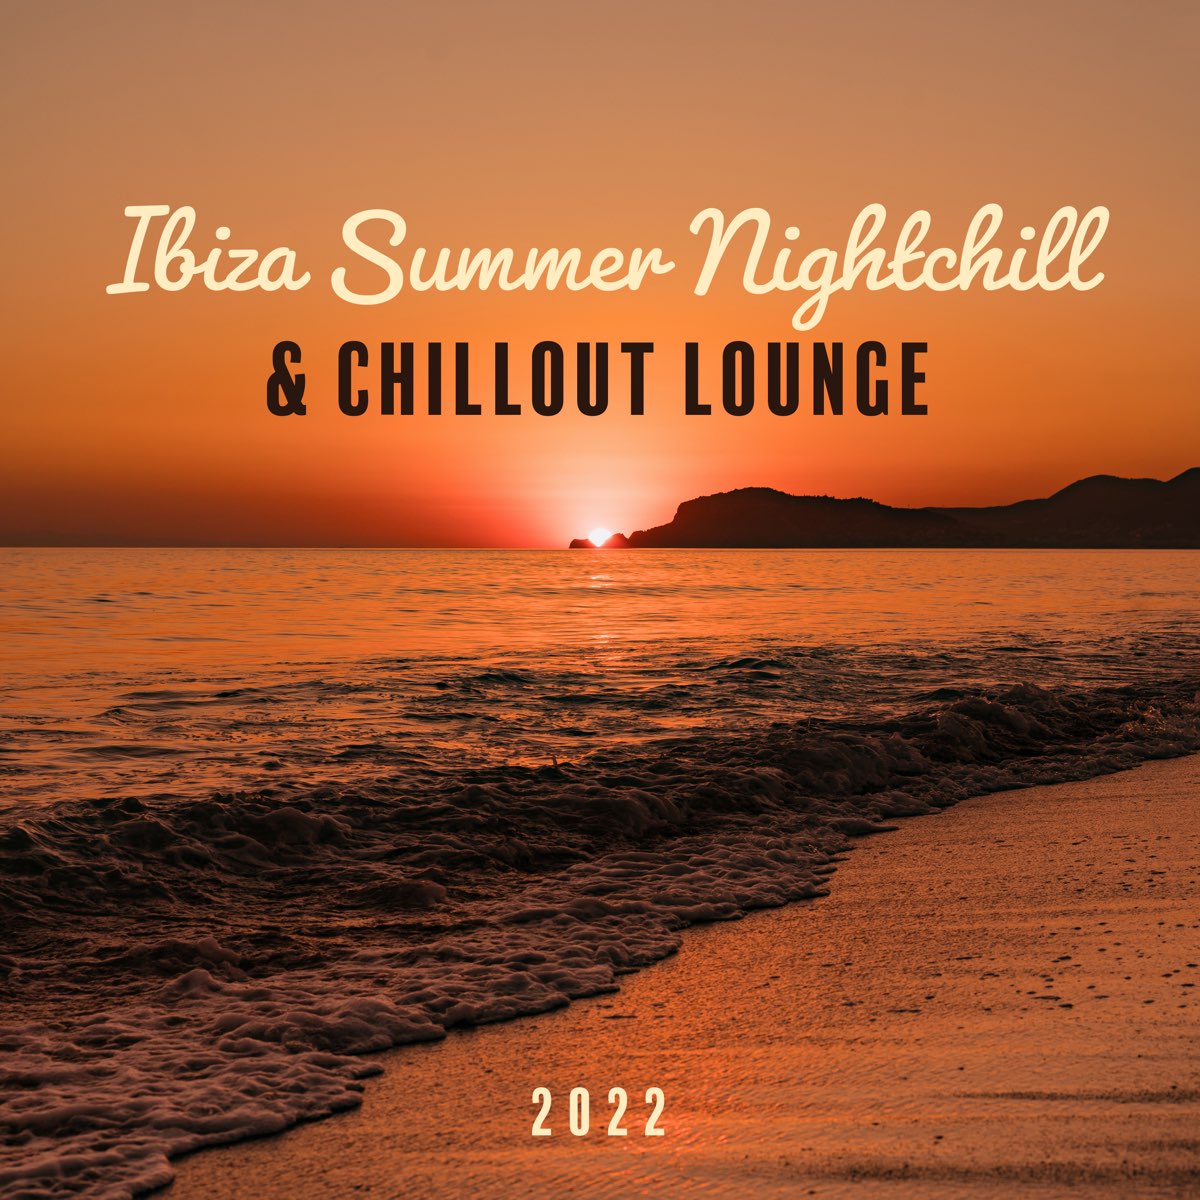 Dj chill. Chillout Lounge. Cosmic Chill Lounge. De-Phazz - Jelly Banquet (2022). Various – Cosmic Chill Lounge Vol.2.